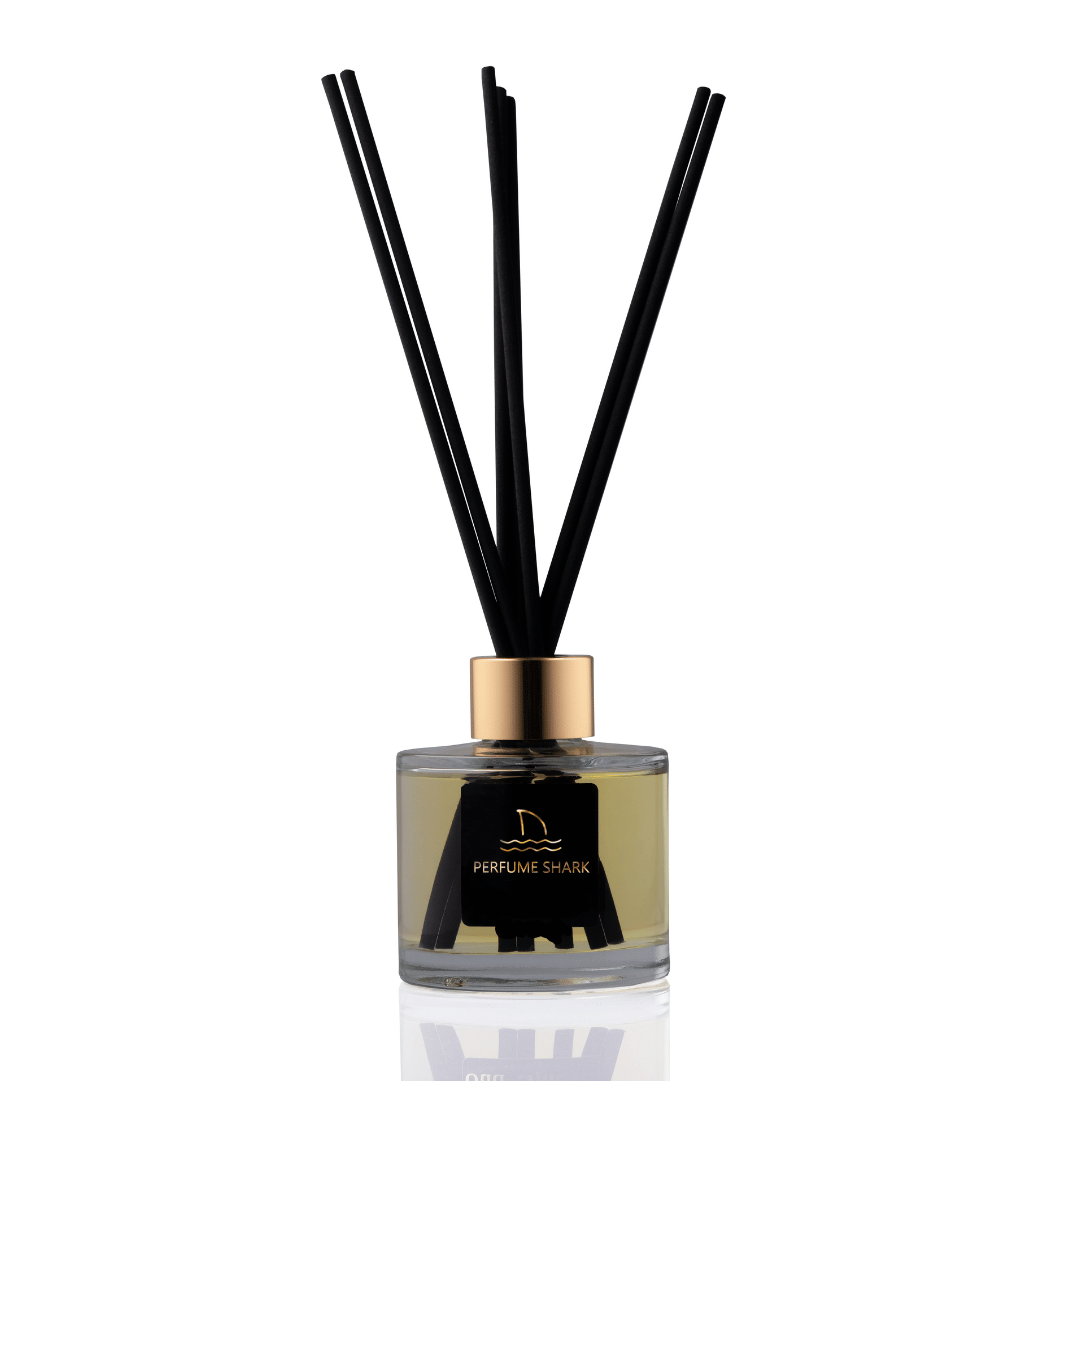 Madagascan - With Similar Fragrant Notes to Vanille Fatale by Tom Ford